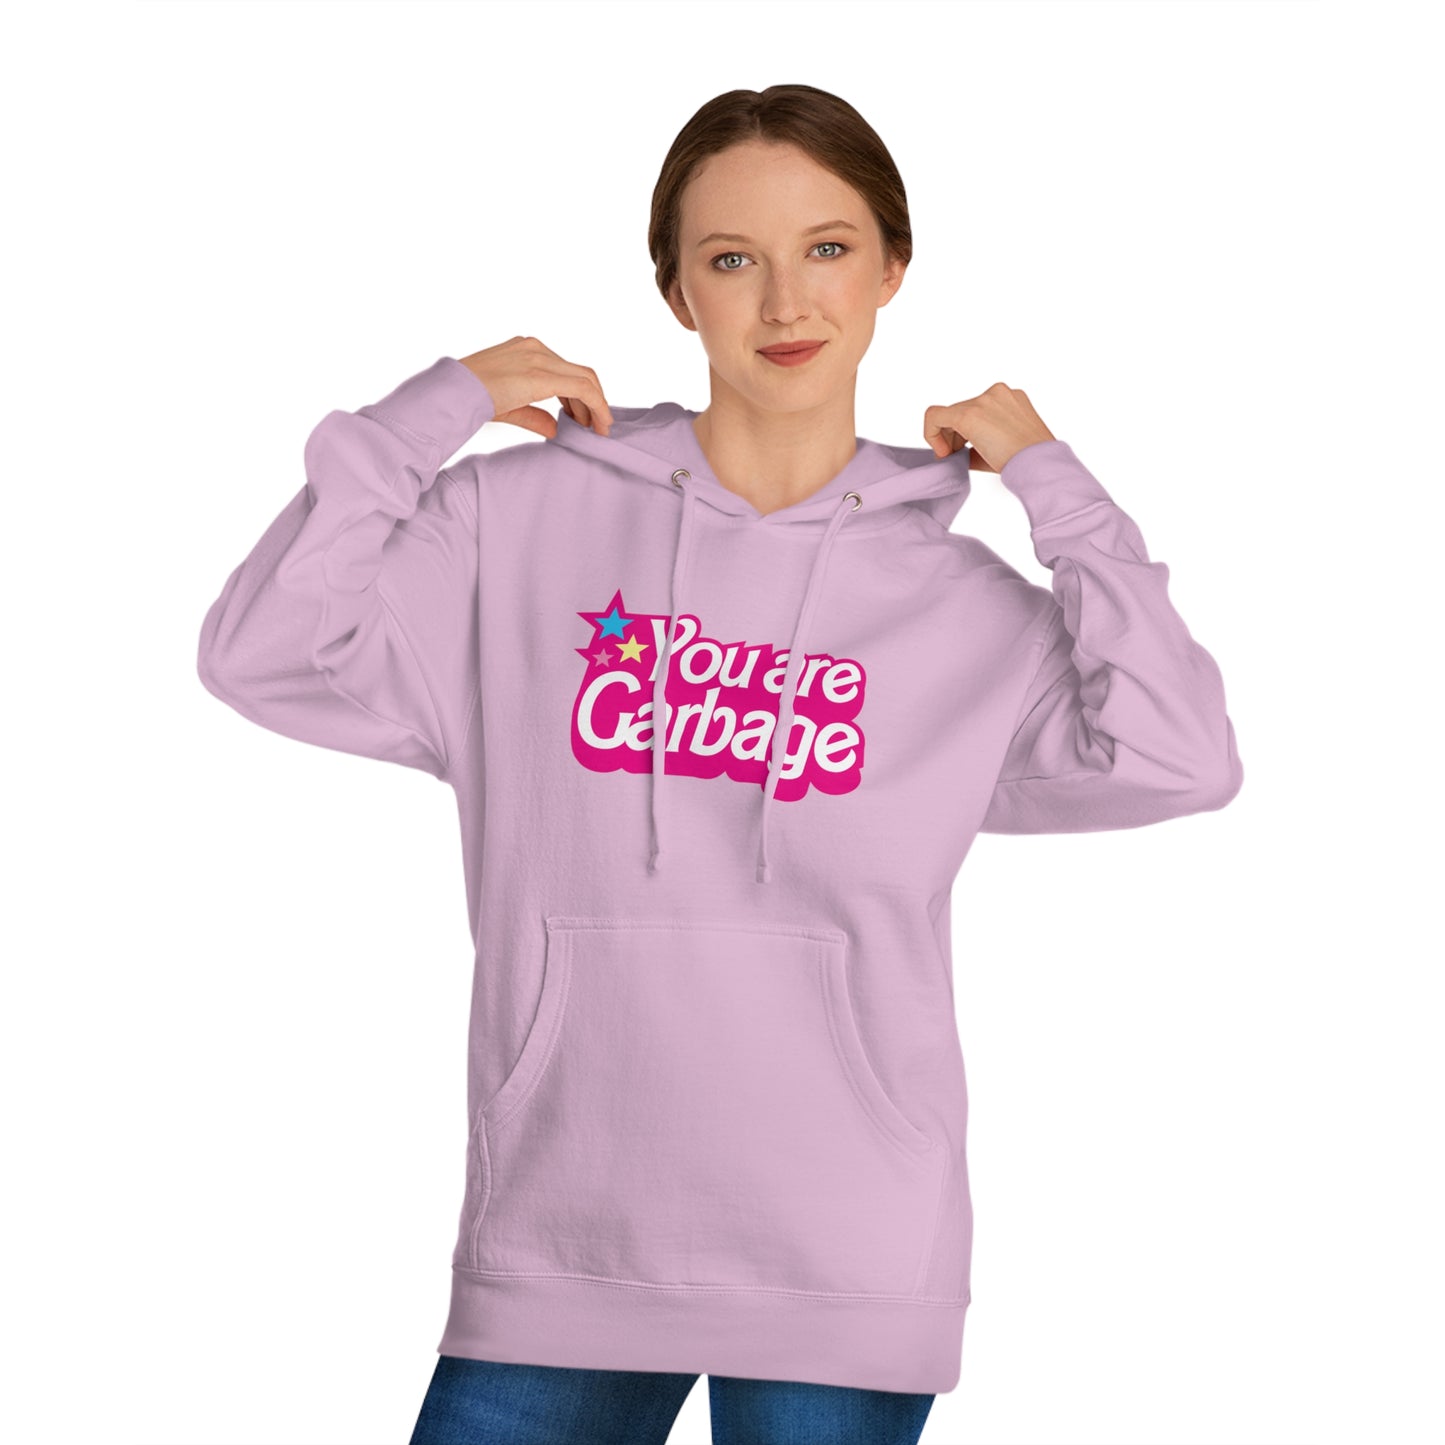 You Are Garbage Hoodie